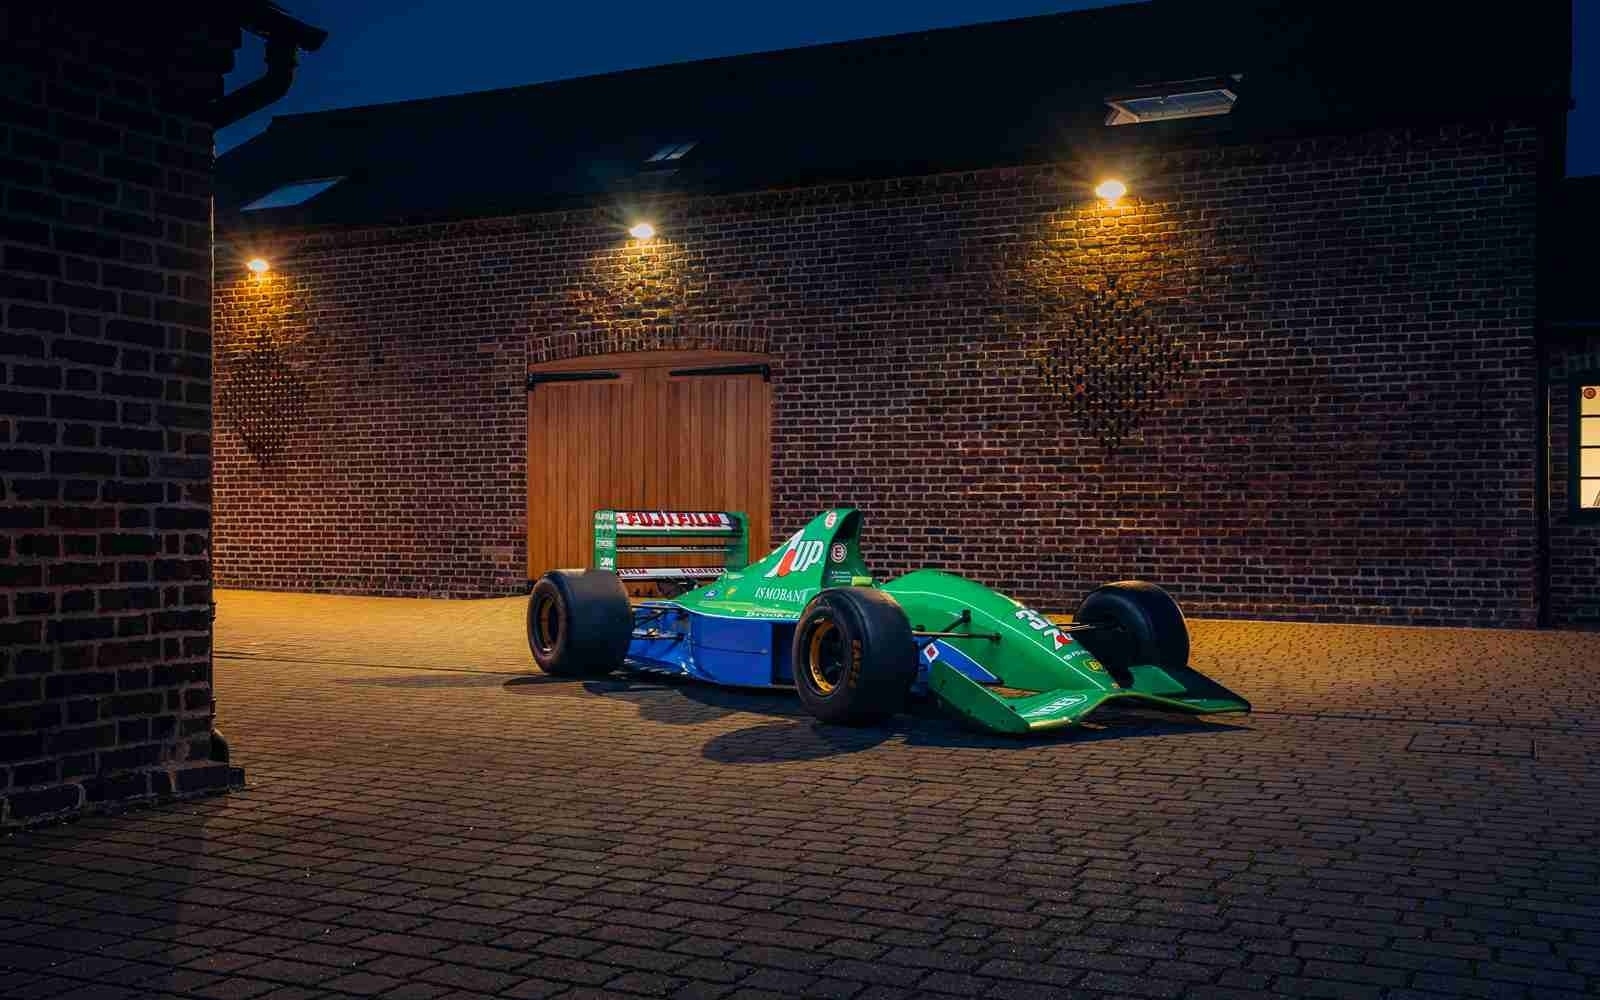 Michael Schumacher’s First F1 Car is for Sale…Again